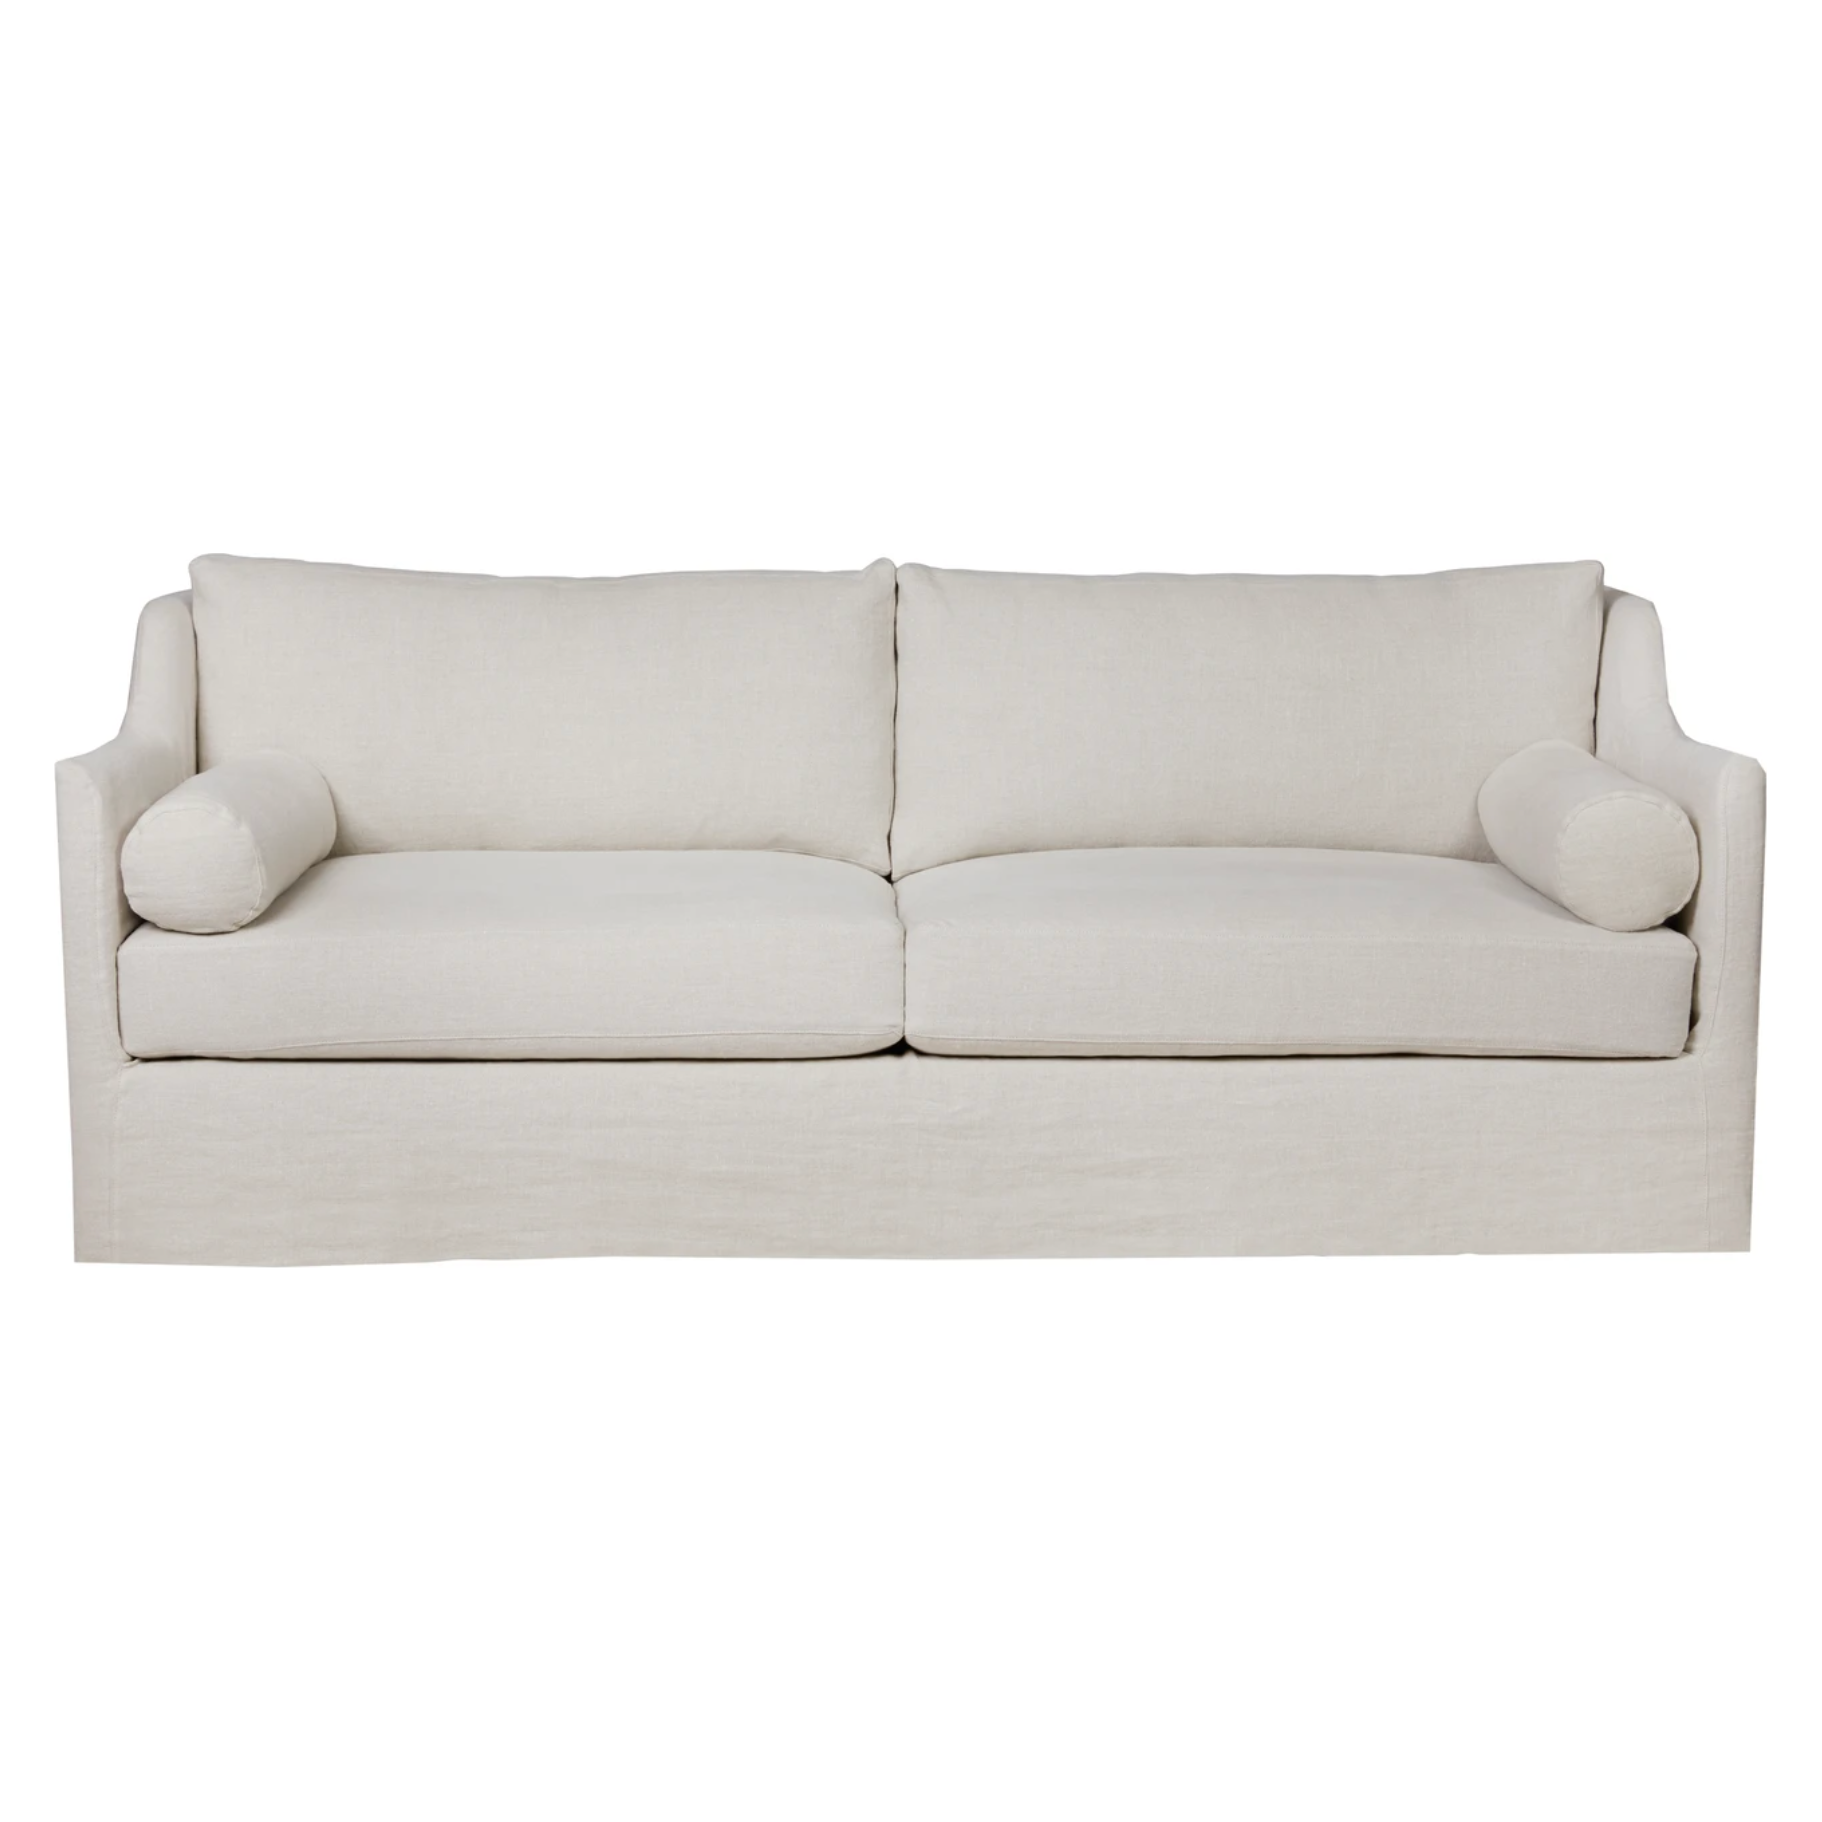 A romantic swooped arm and a super cozy bench style cushion makes the Dalia Sofa by Cisco Brothers one of our favorites!  Photographed in Molino White 100% cotton and Brevard Natural.